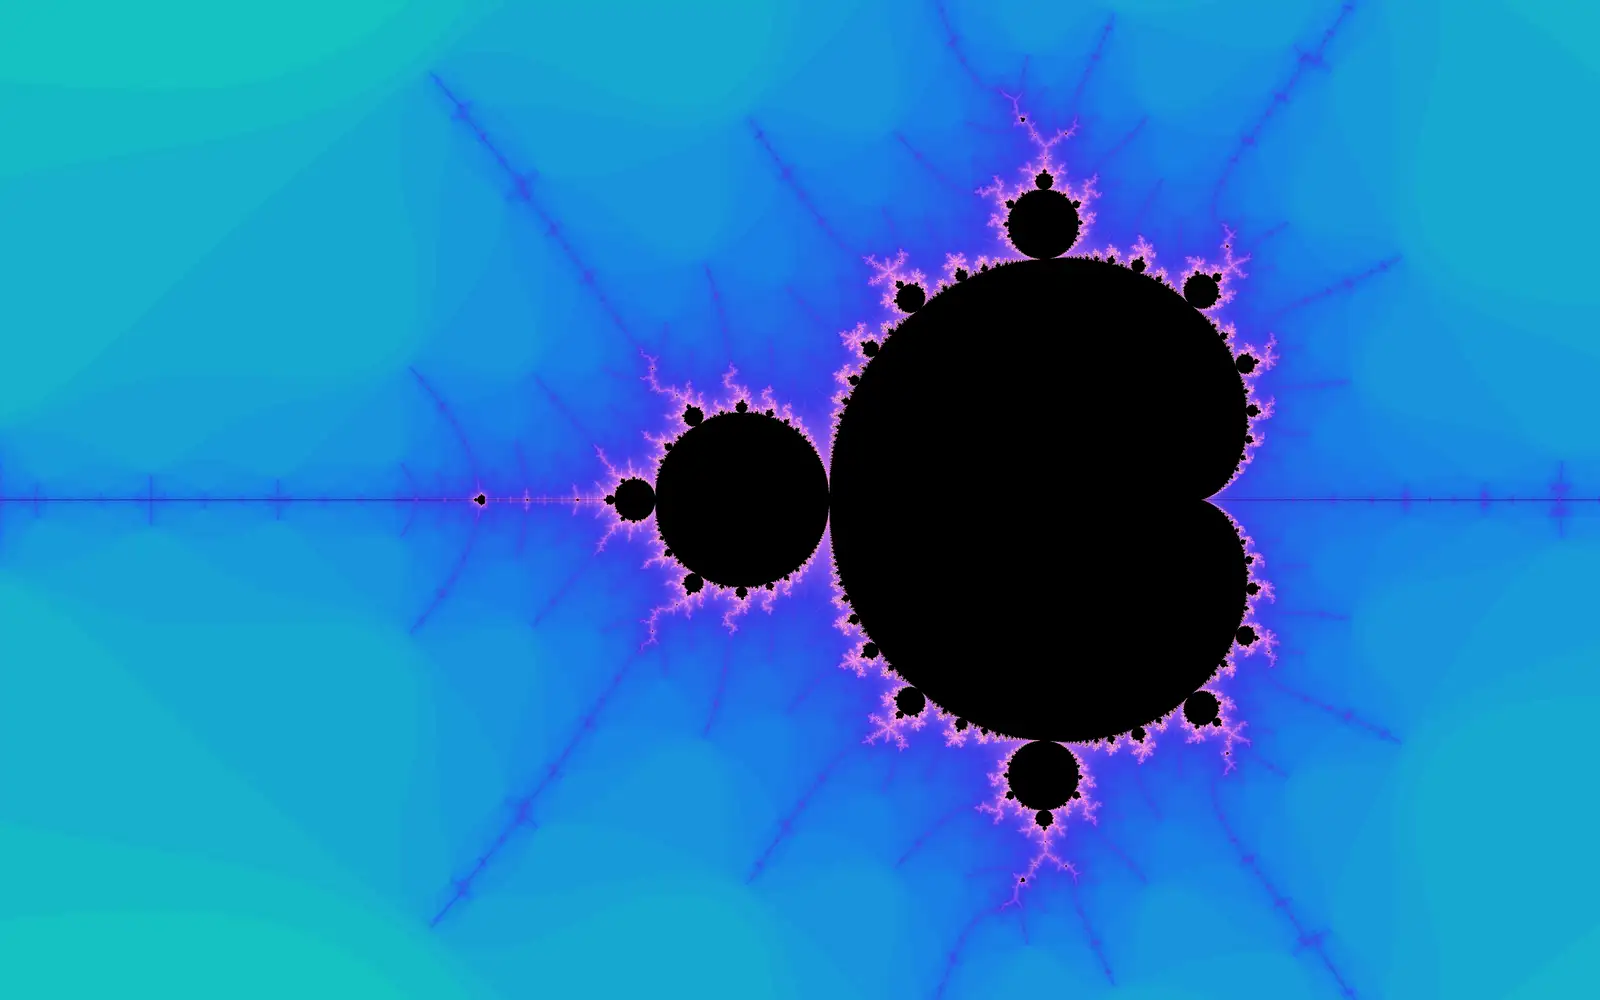 My first attempt at rendering the Mandelbrot Set. Not bad, eh?